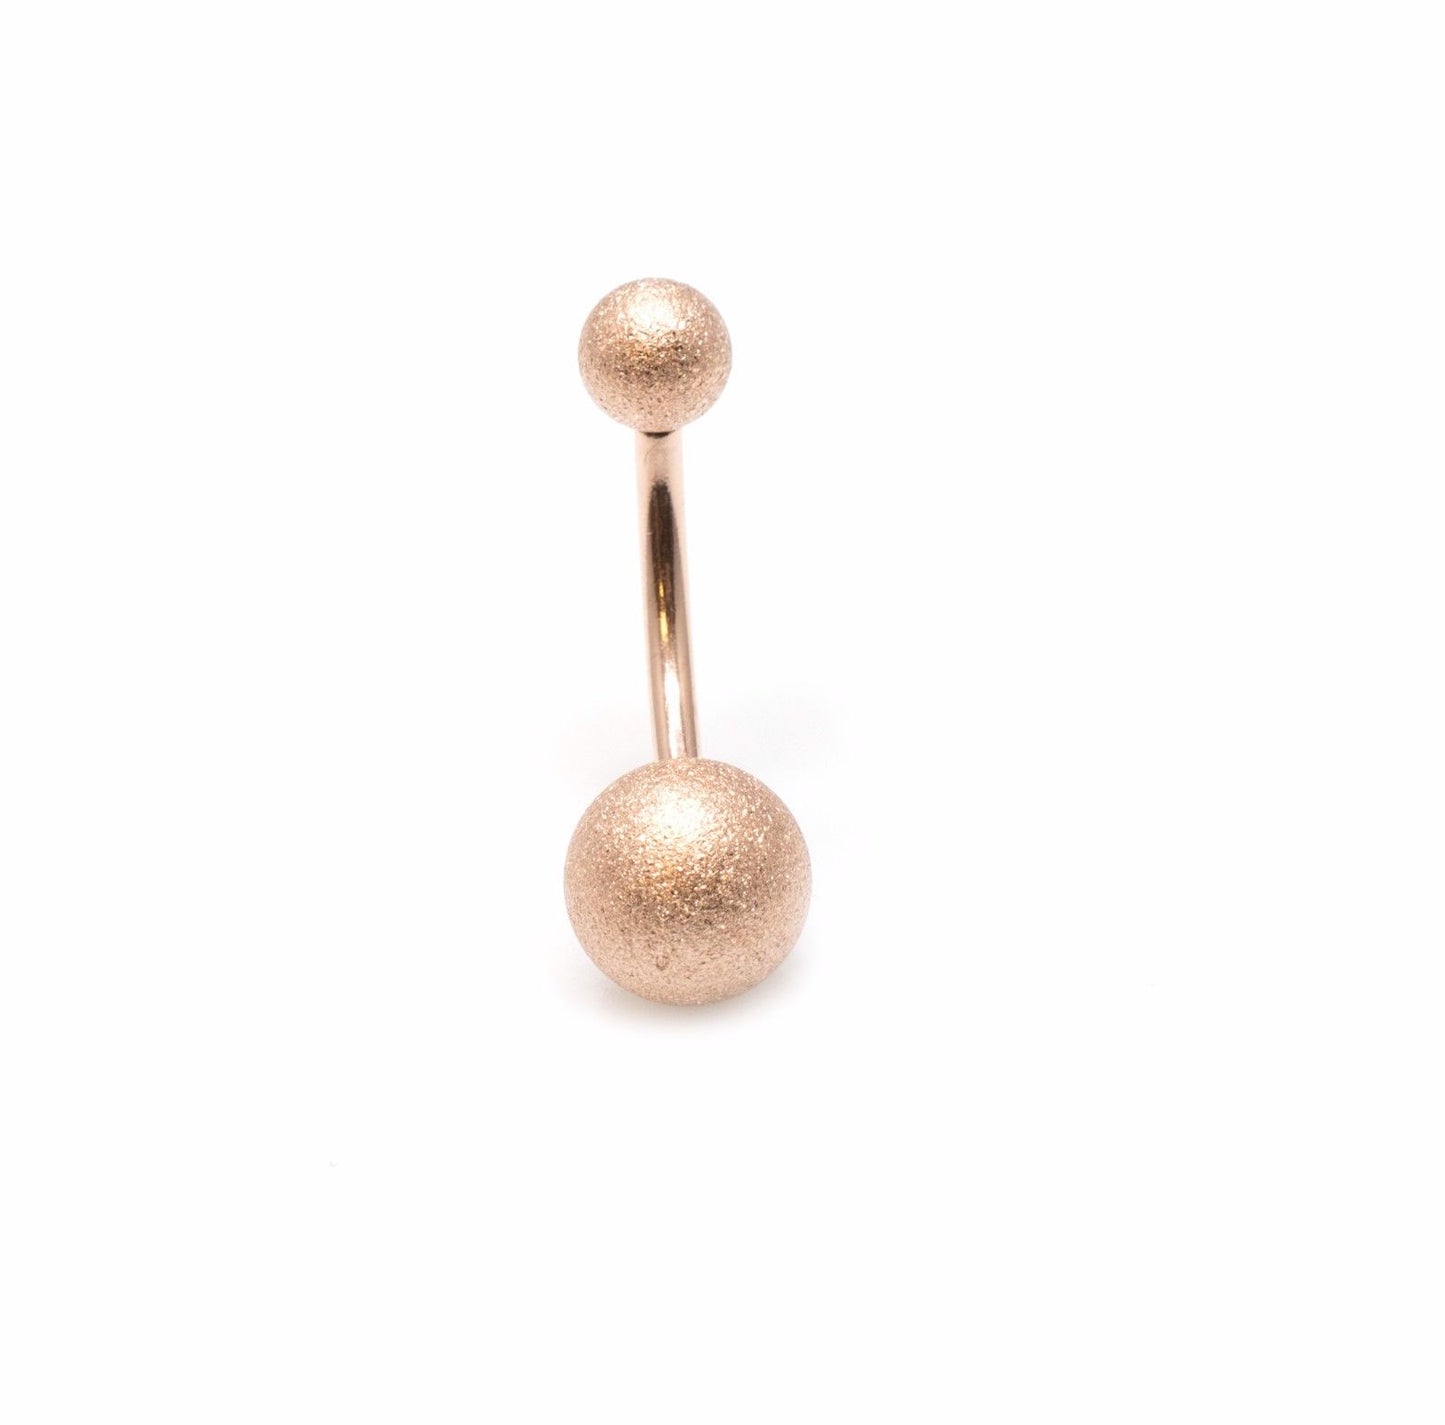 Belly Button Ring 14G Sand Finish Ball Ends Navel Ring Body Jewelry - 4 Colors